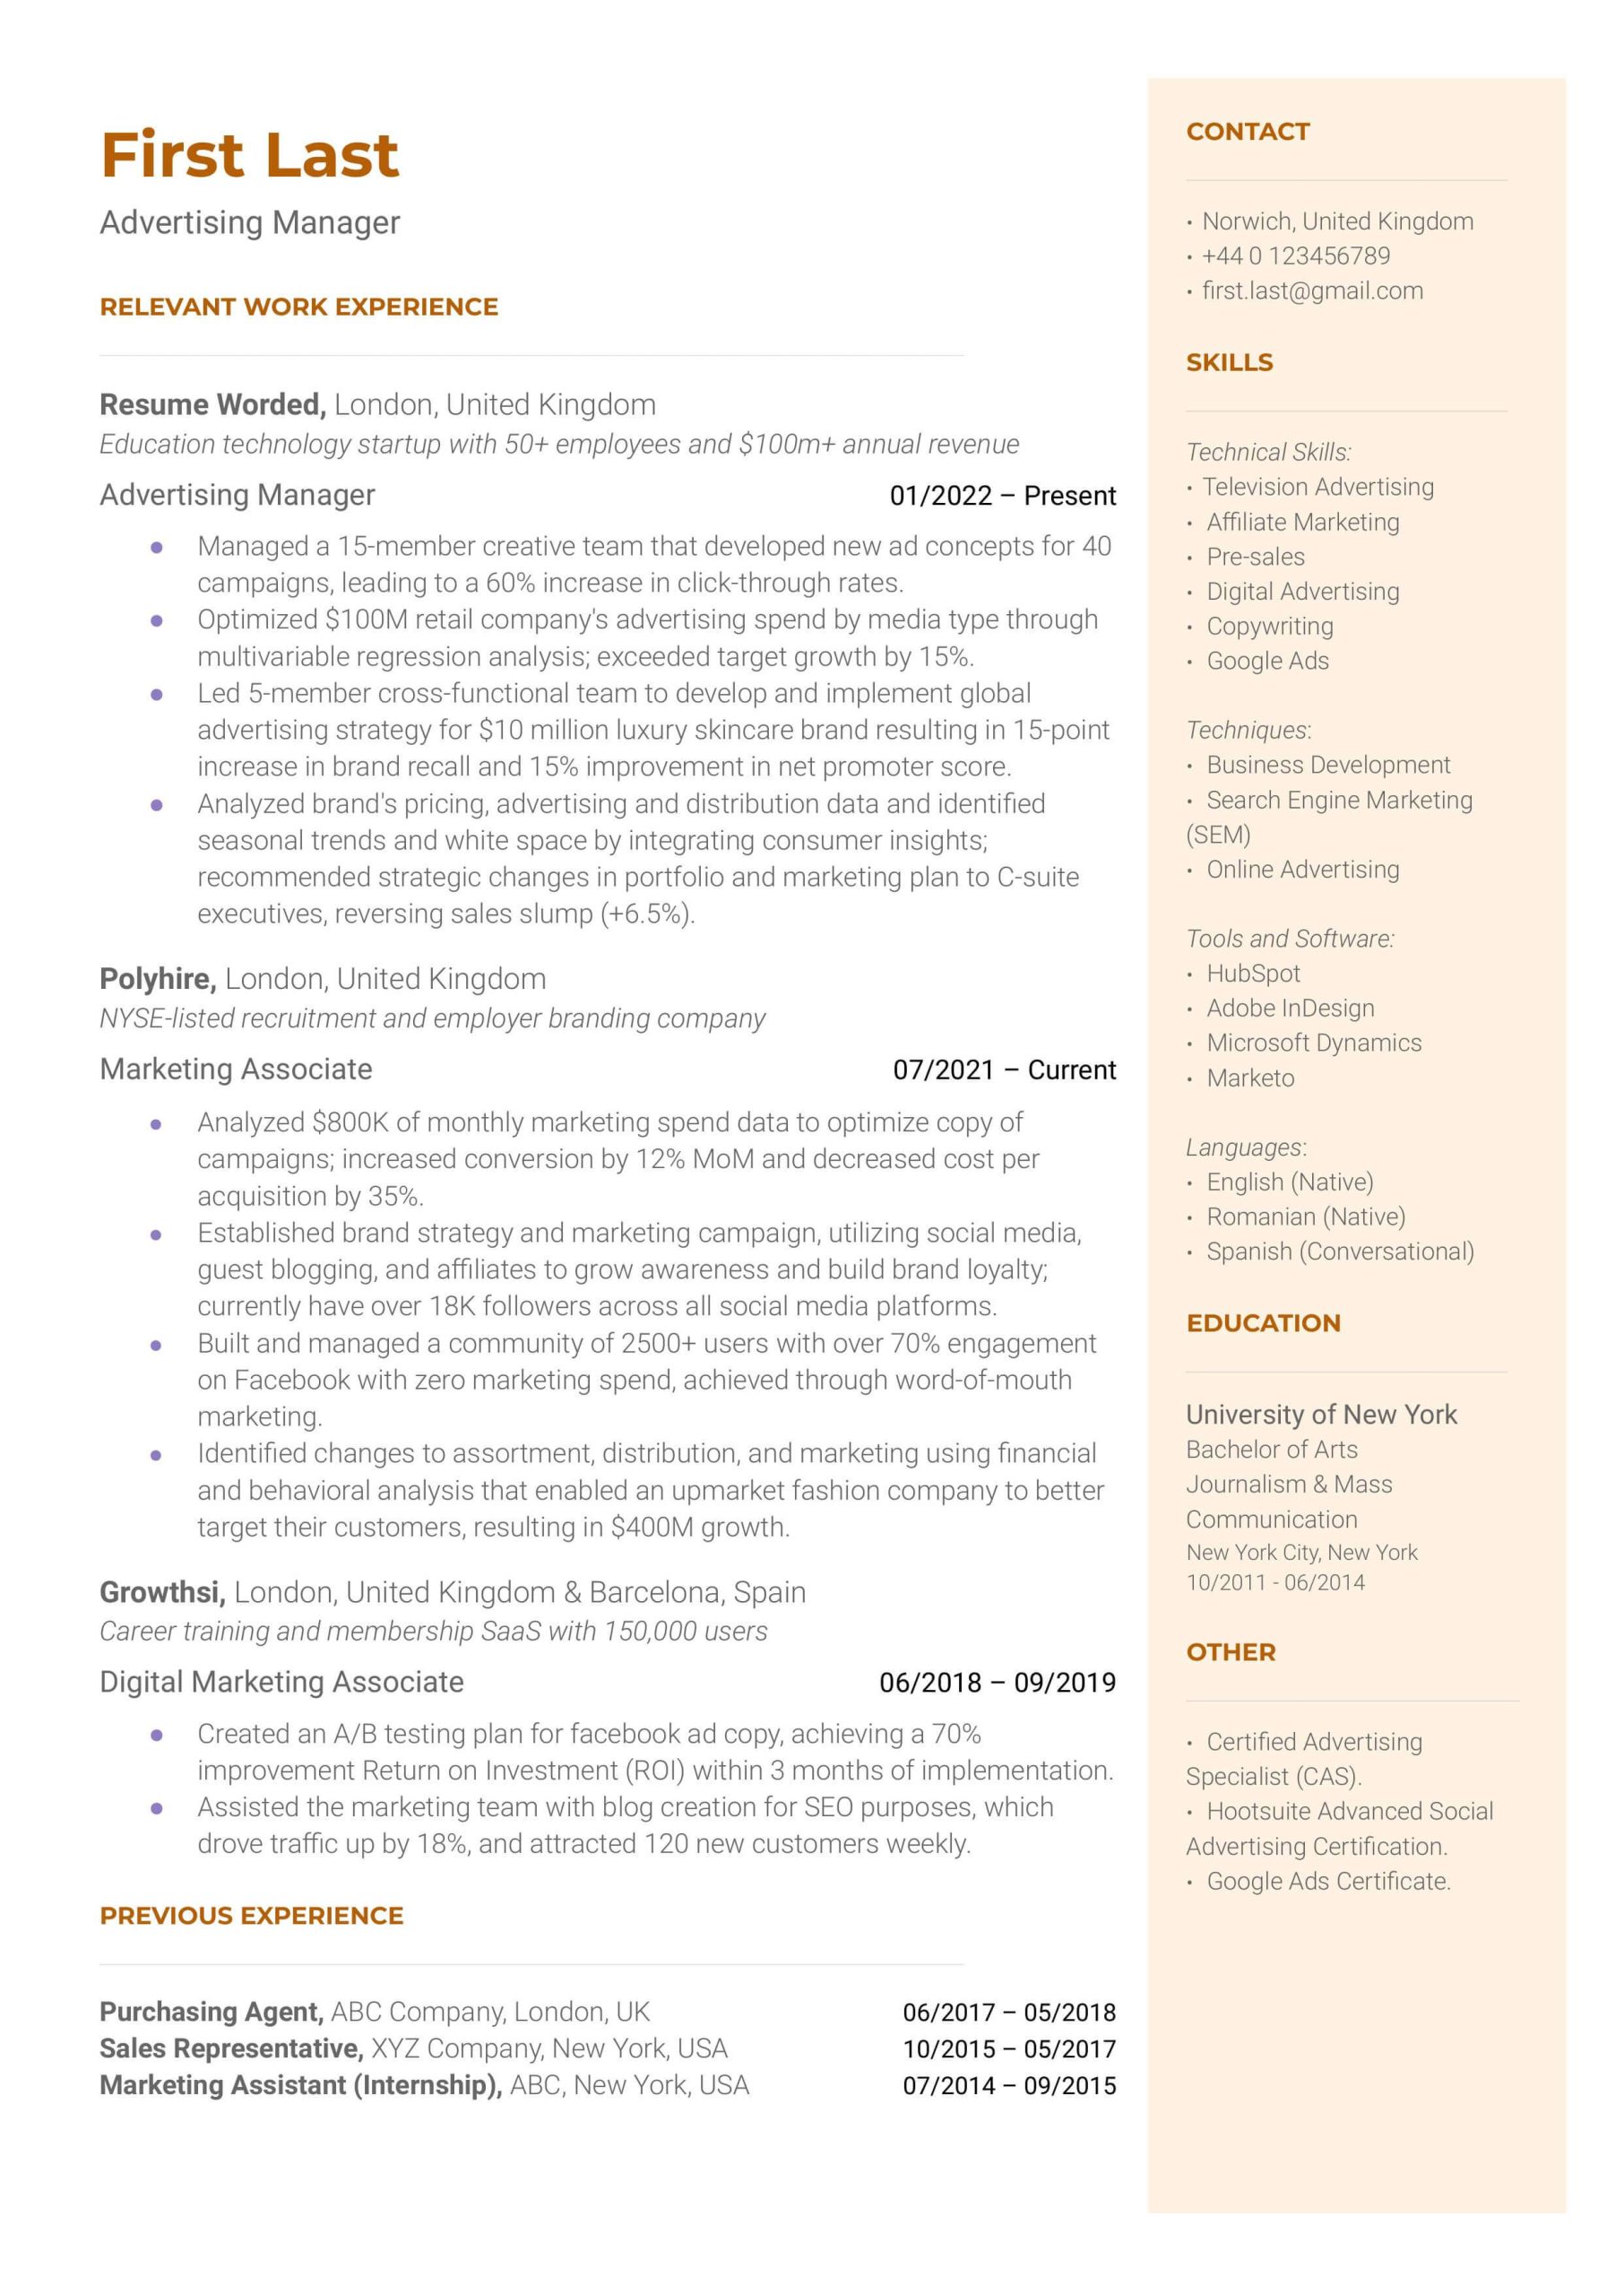 Same Workspace Different Positions Resume Sample 4 Advertising Resume Examples for 2022 Resume Worded